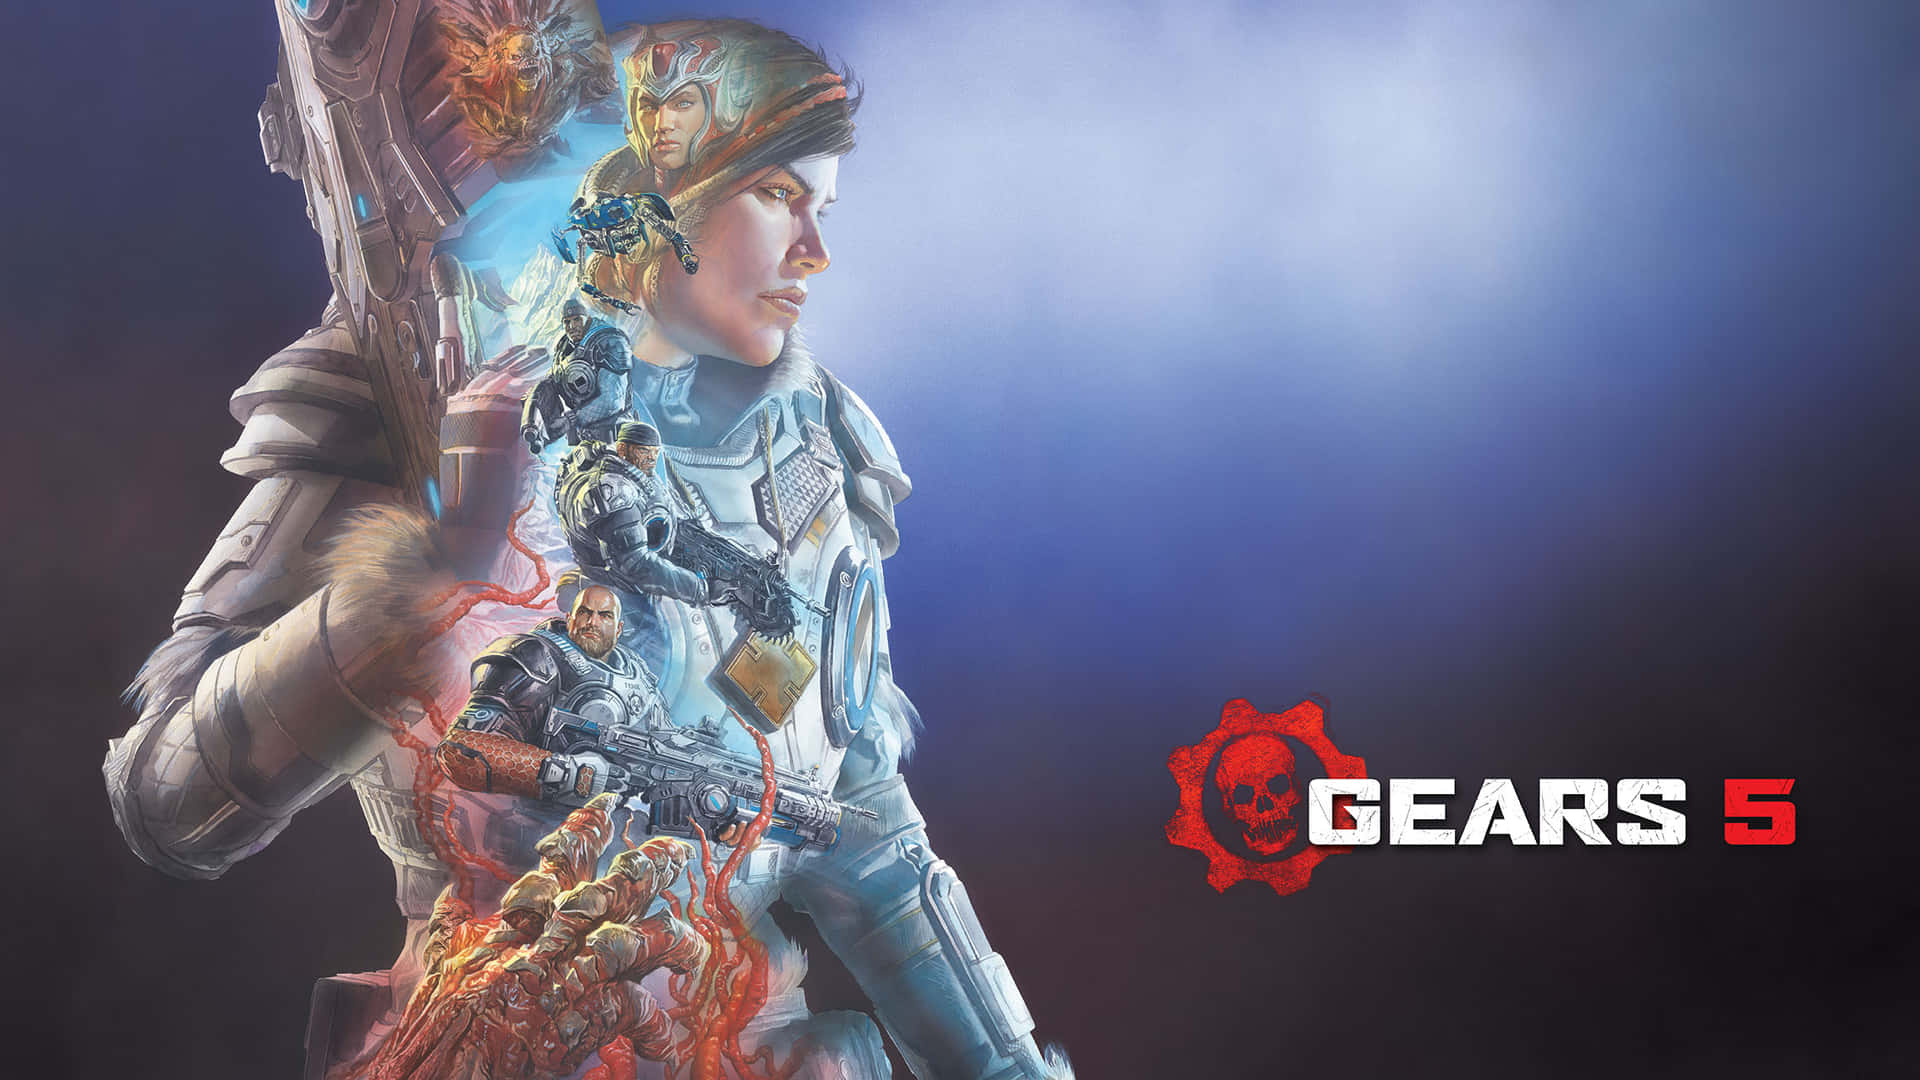 The Best of Gears Of War 5 Awaits You!